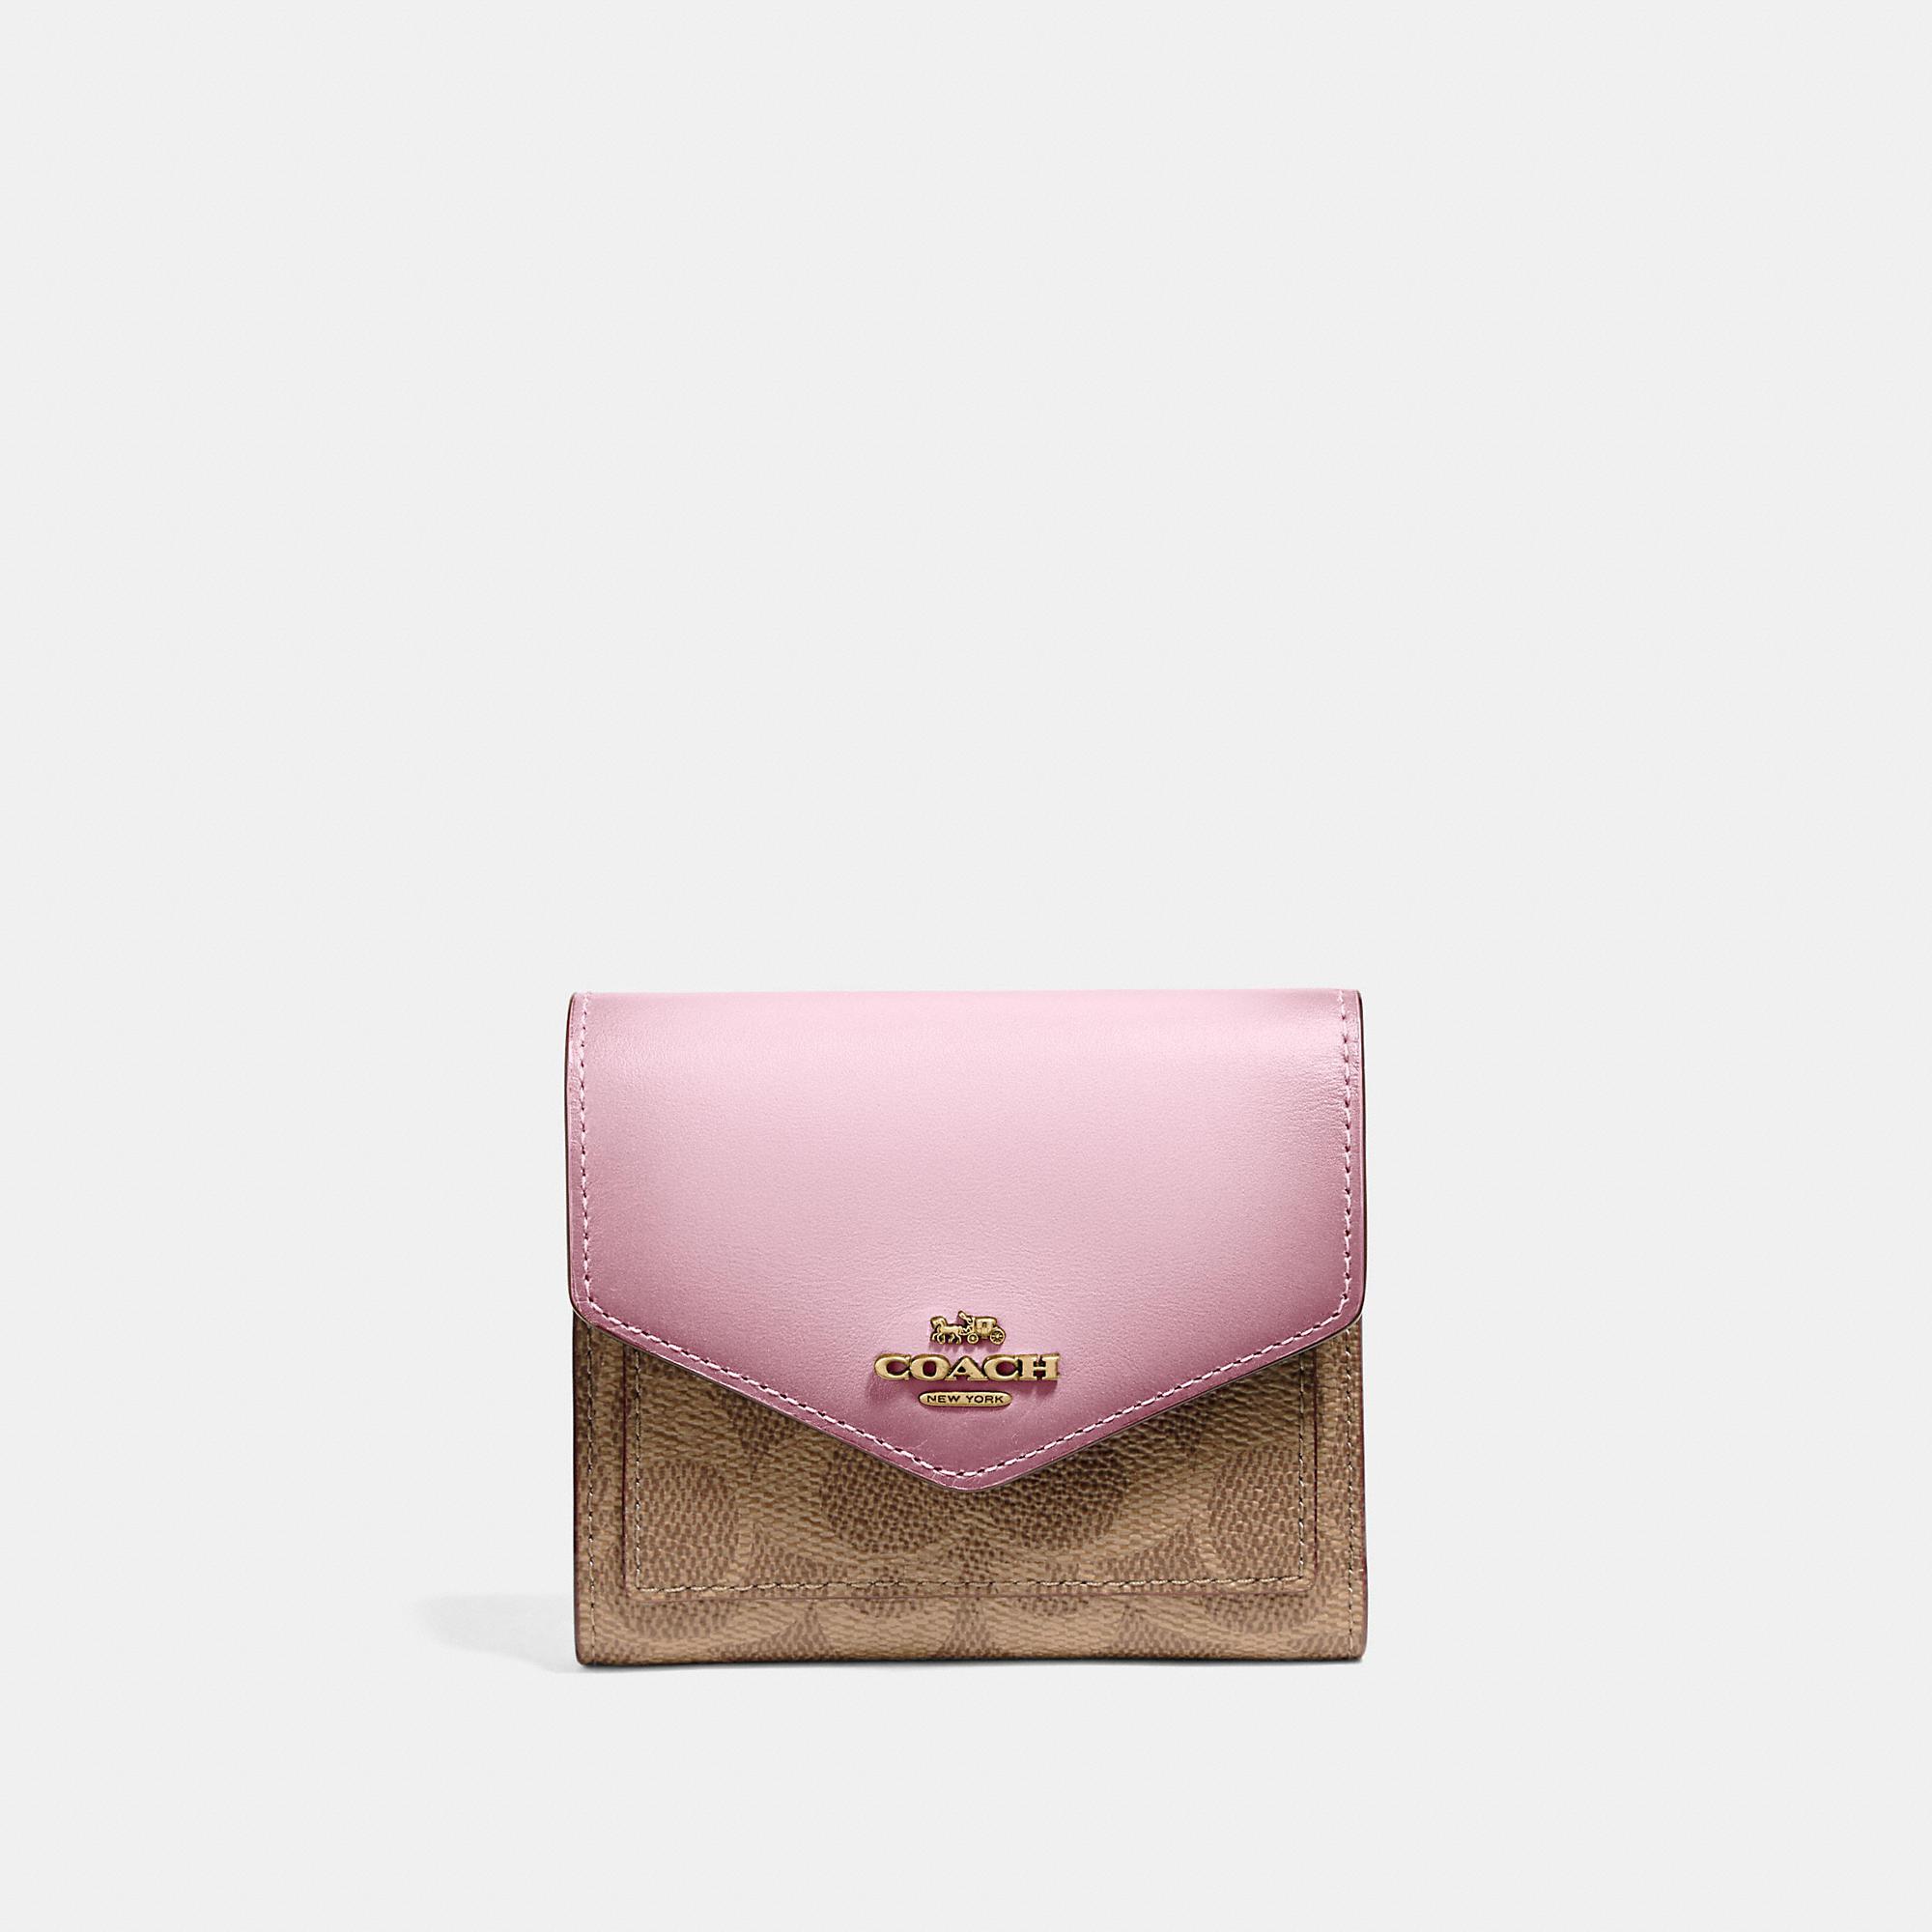 COACH Small Wallet In Colorblock Signature Canvas in Pink